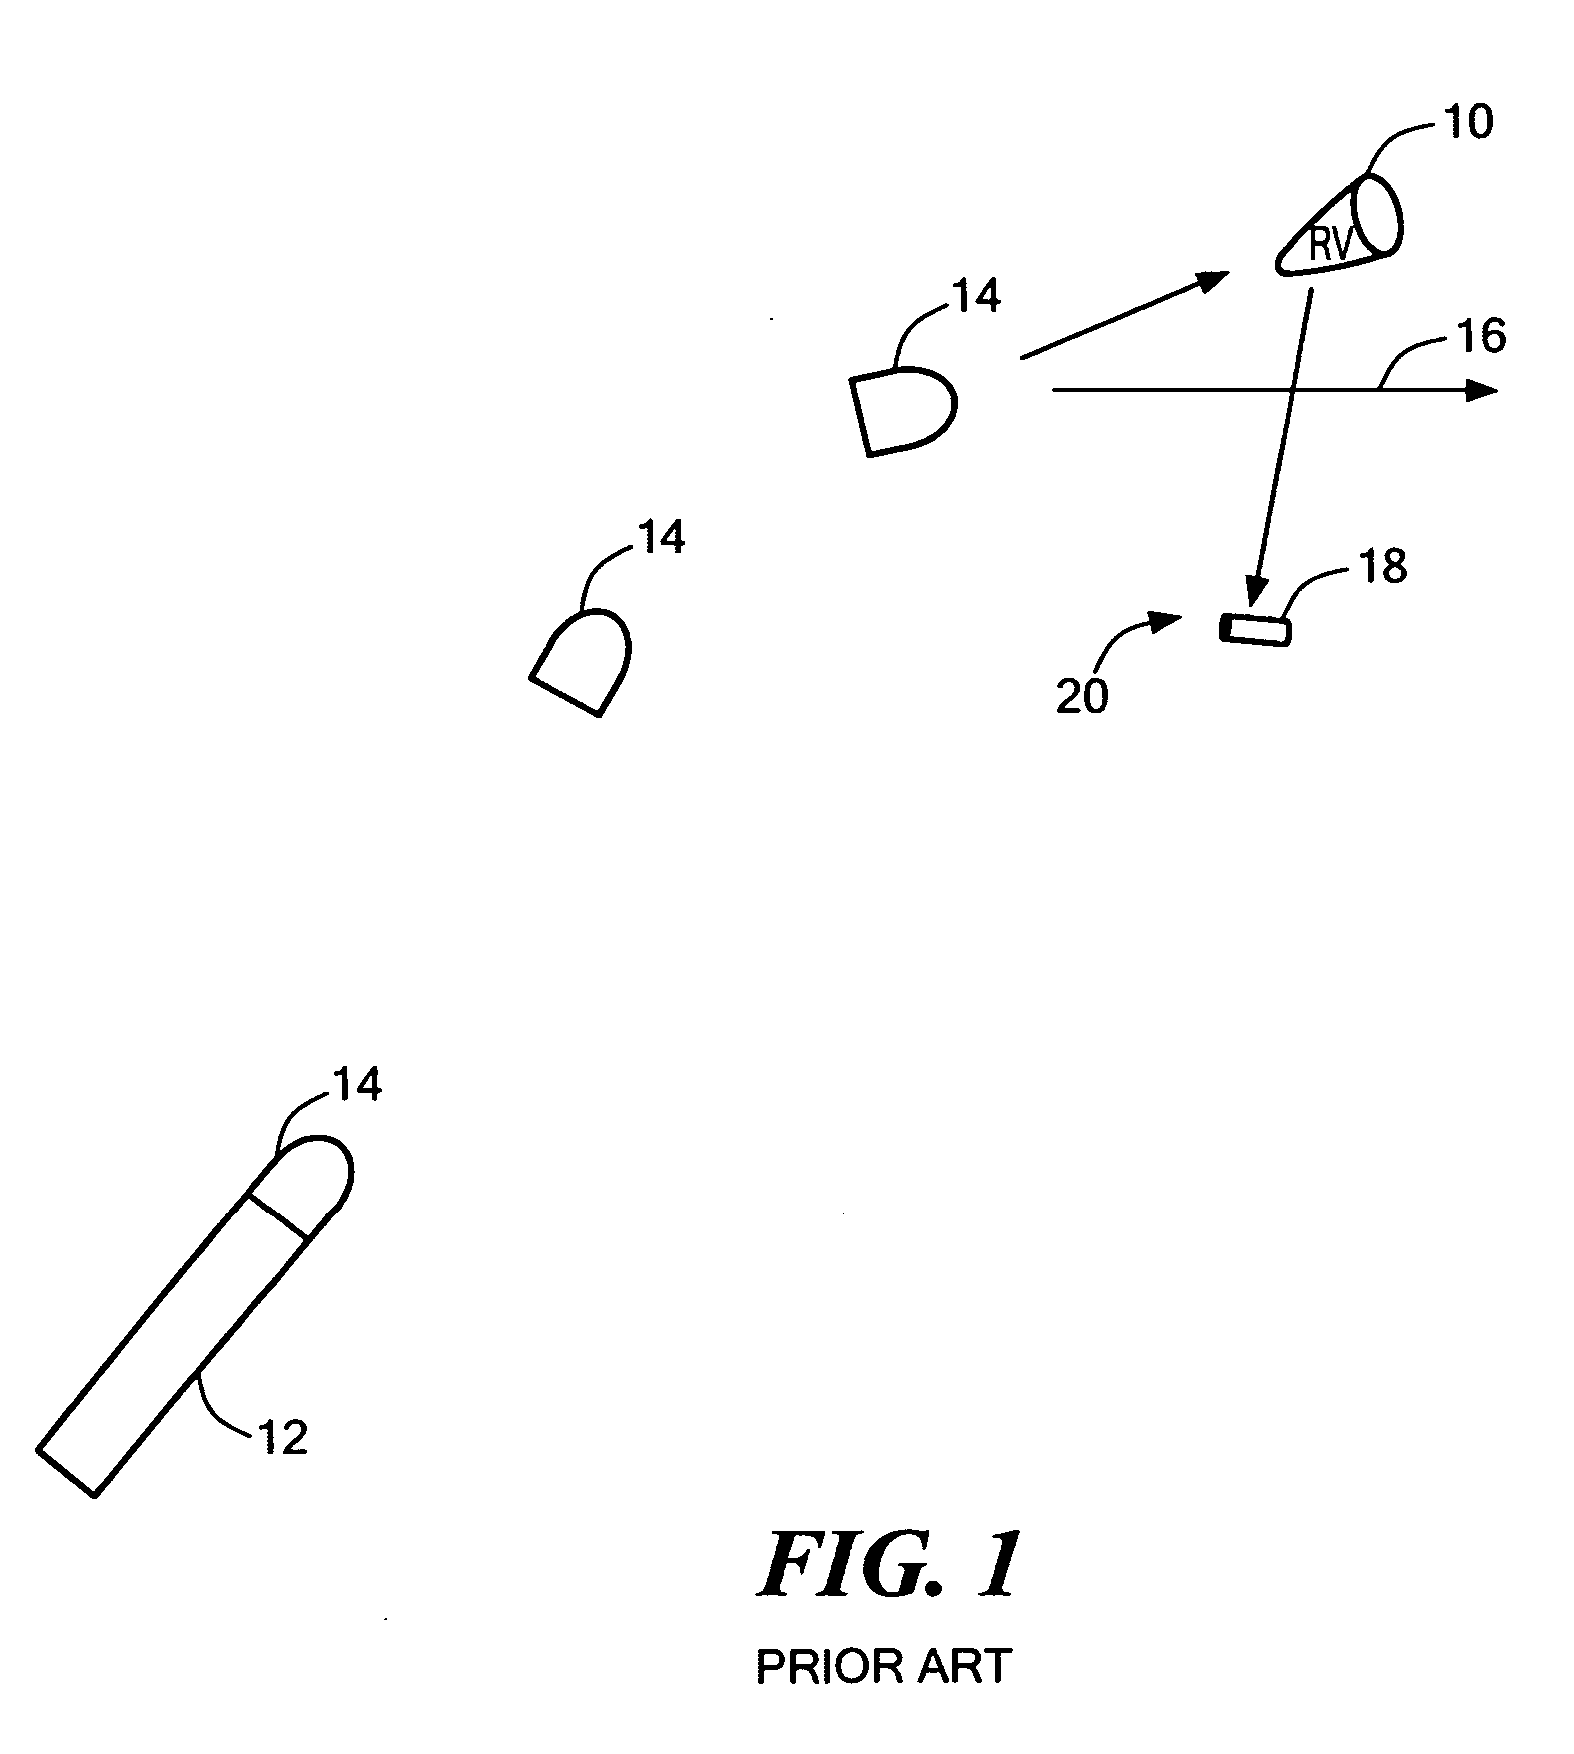 Kinetic energy rod warhead with lower deployment angles